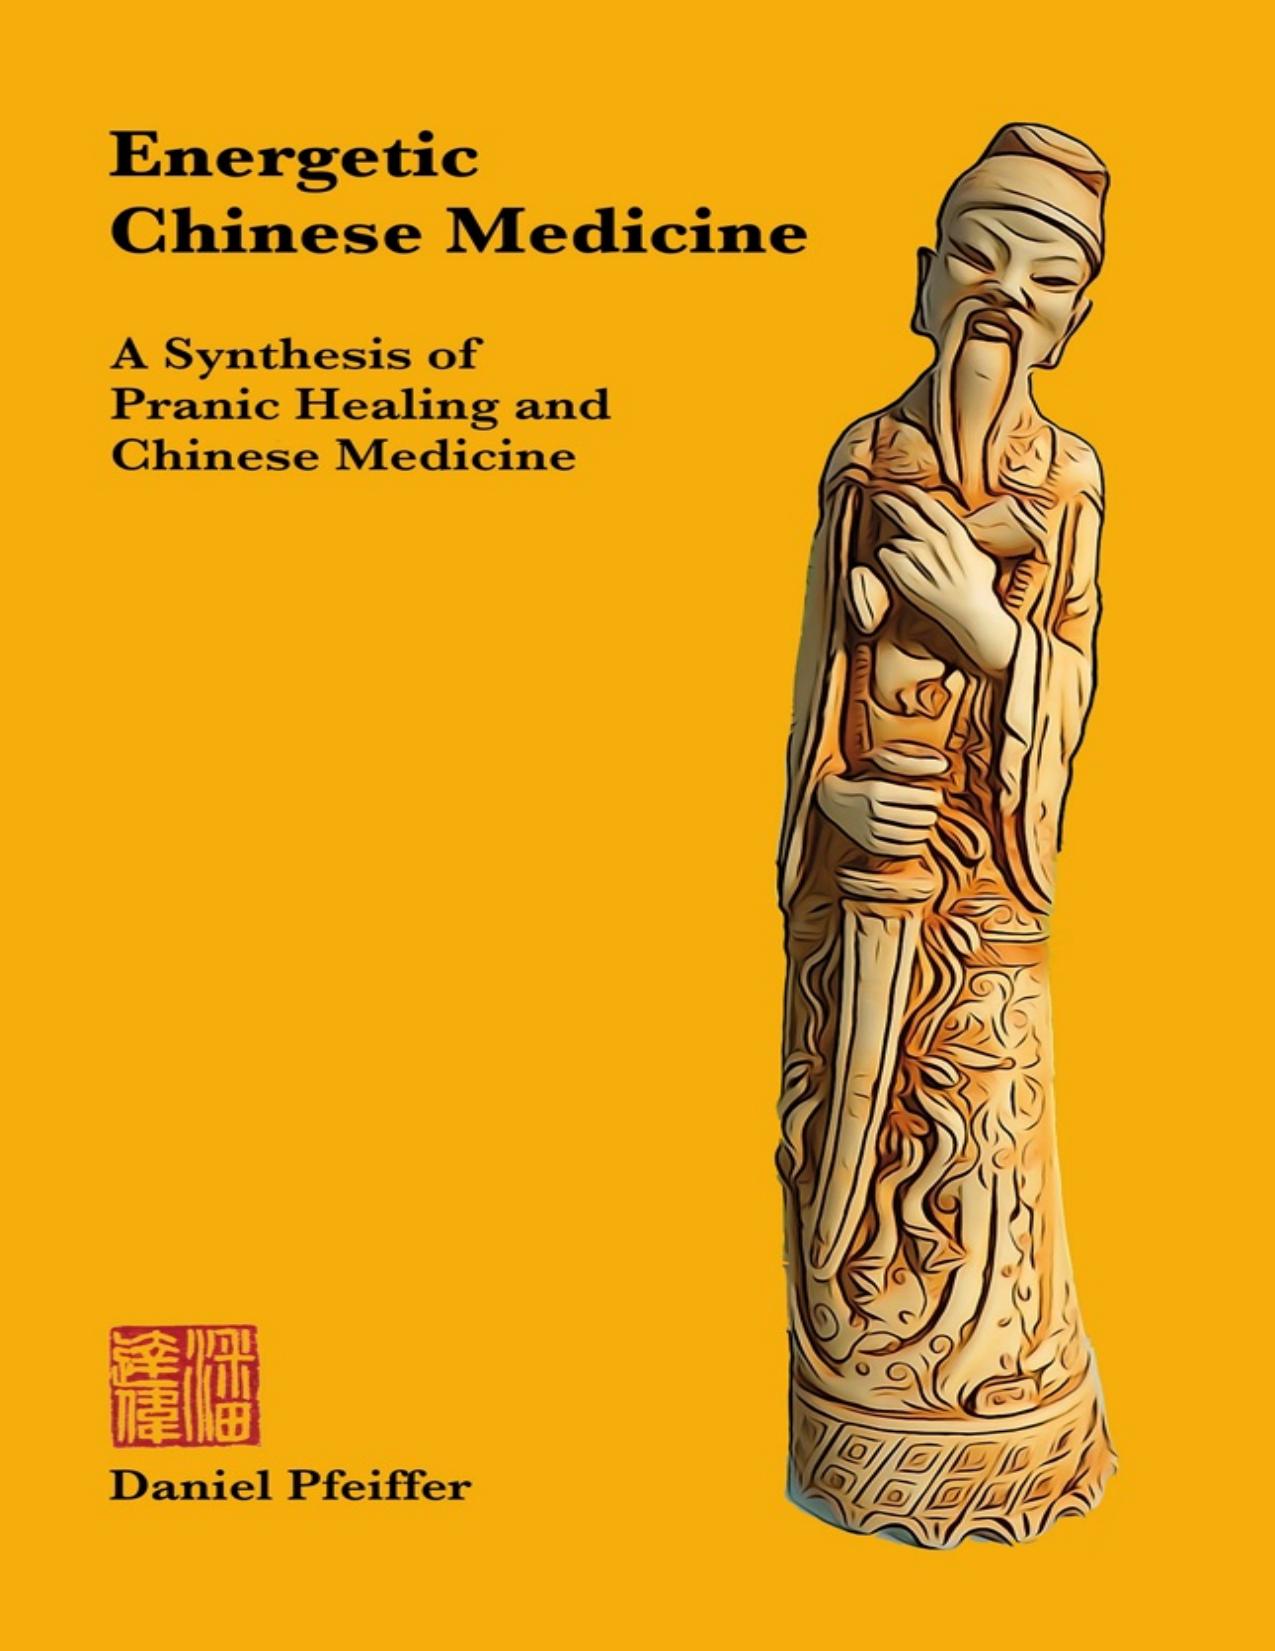 Energetic Chinese Medicine: A Synthesis of Pranic Healing and Chinese Medicine - PDFDrive.com